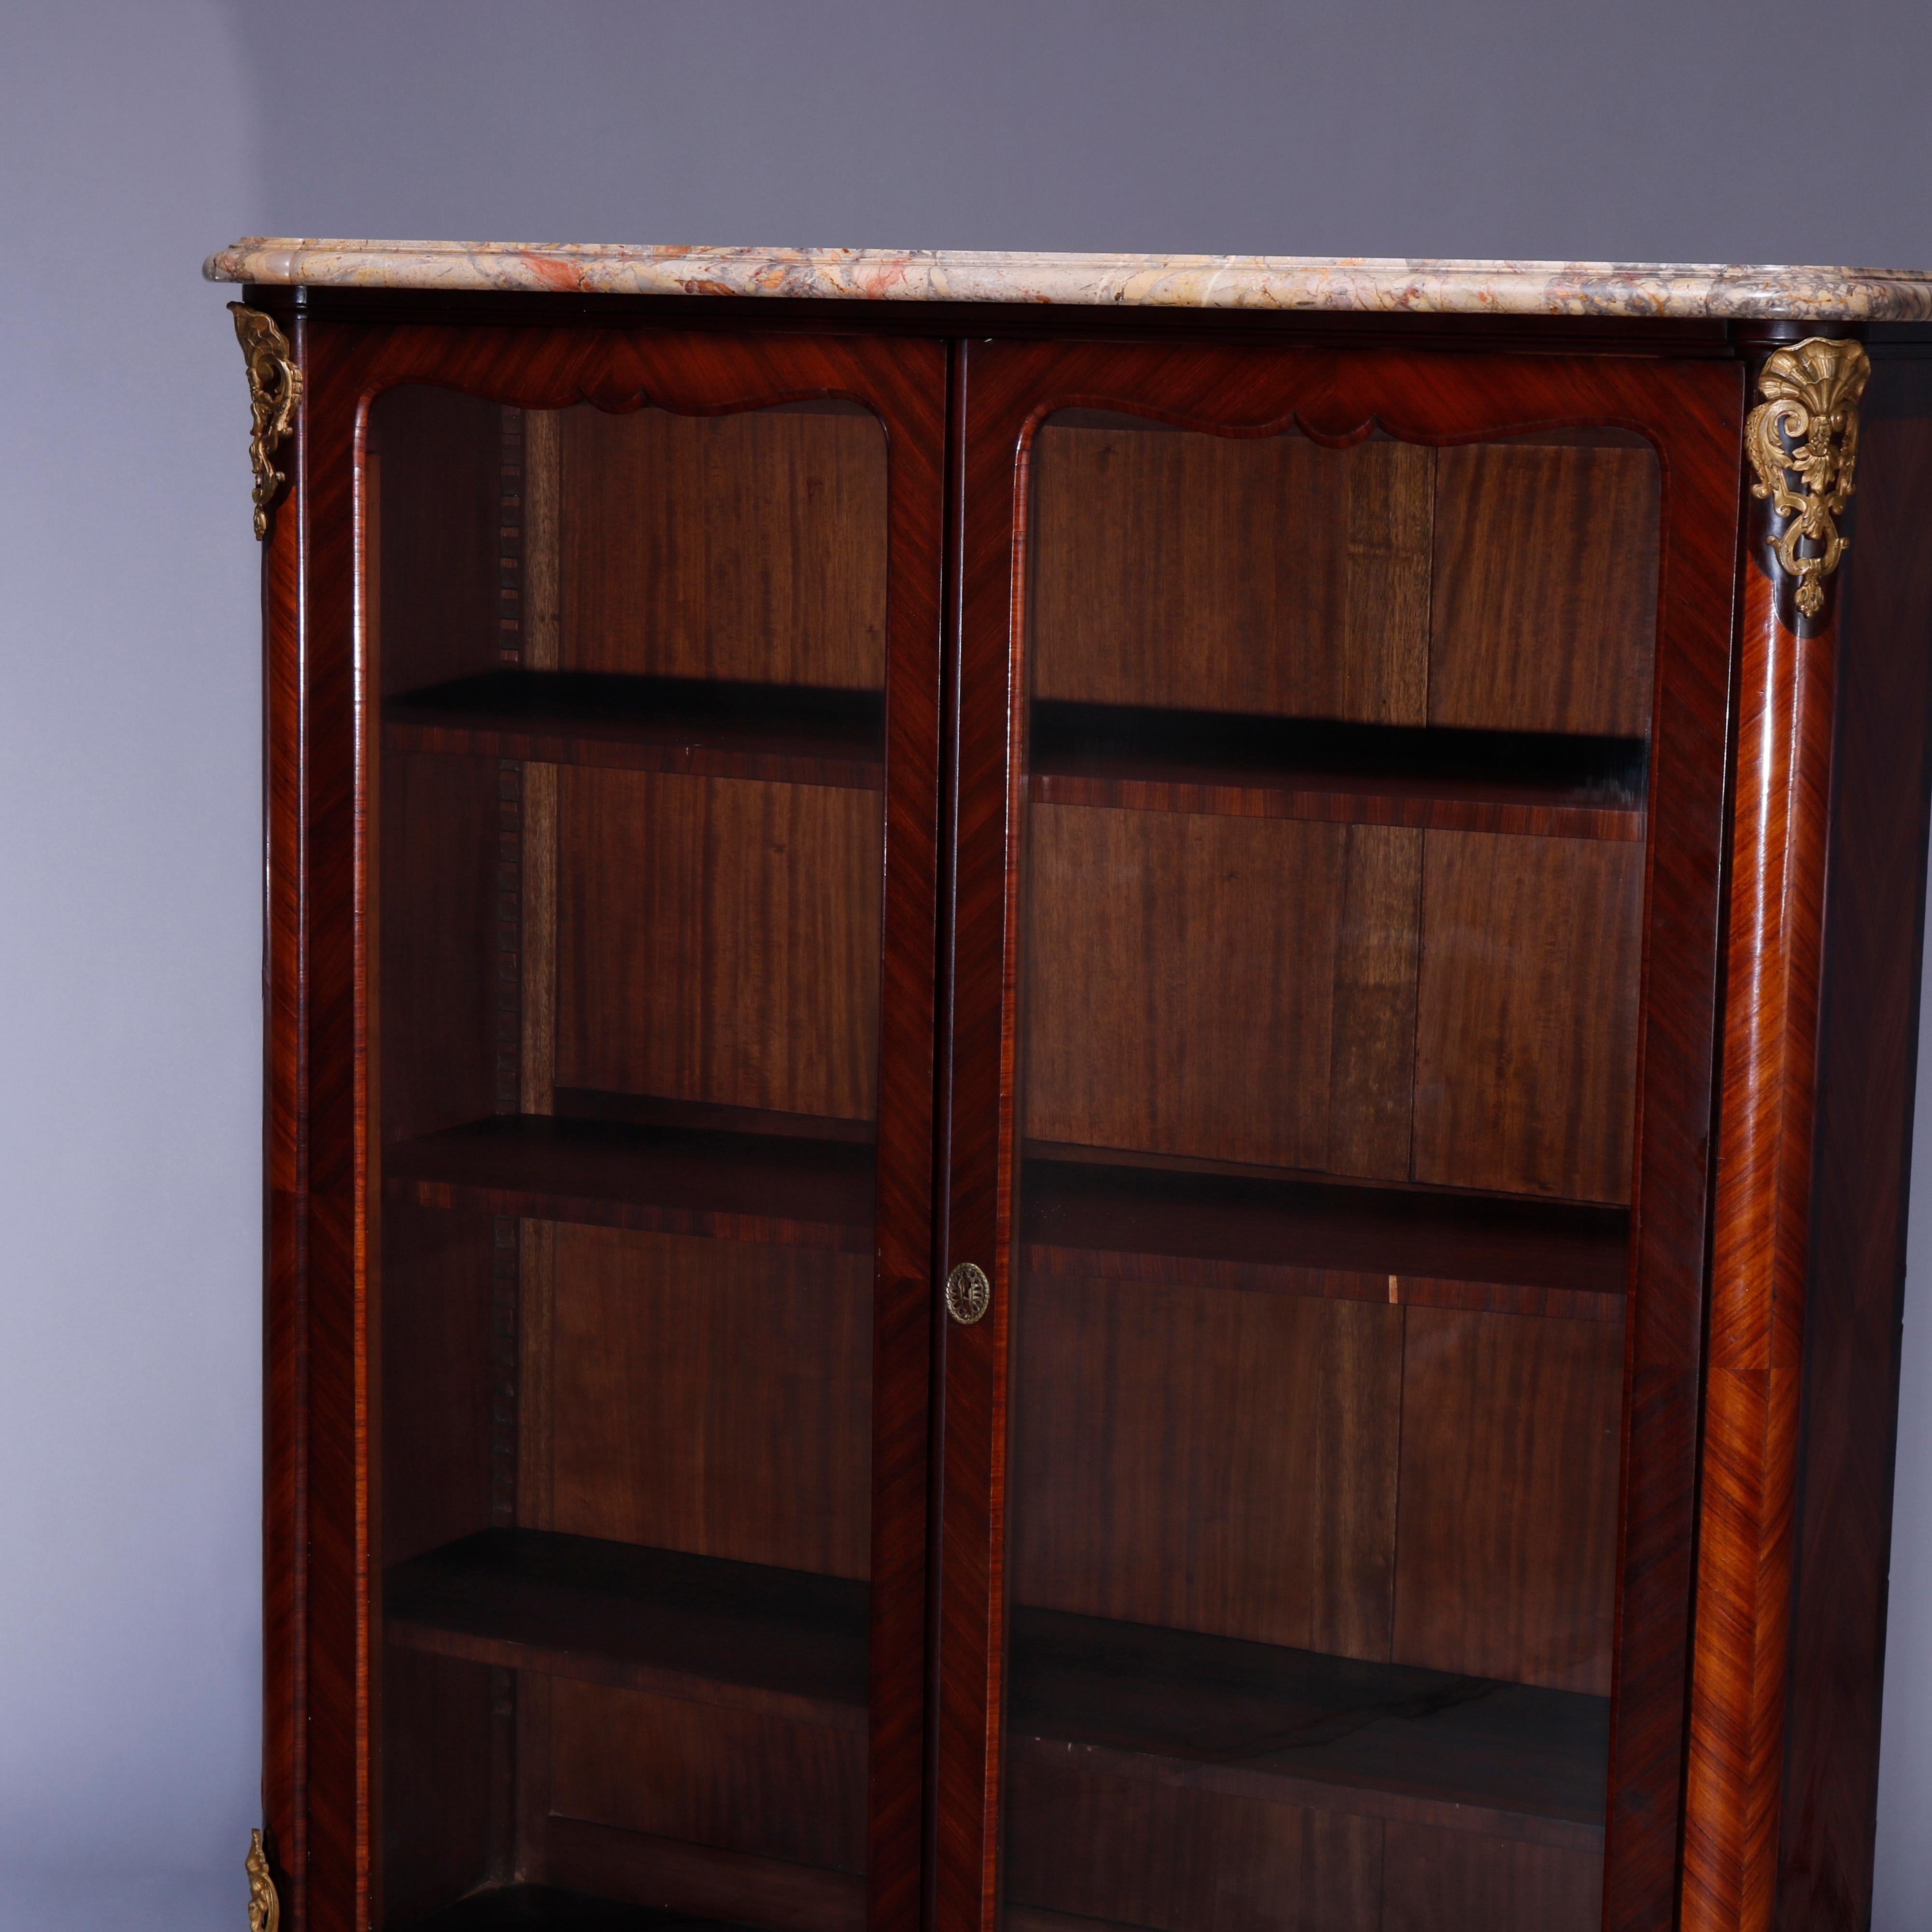 Metal Antique French Louis XV Kingwood, Marble & Ormolu Bookcase by E. Poteau, c1870 For Sale